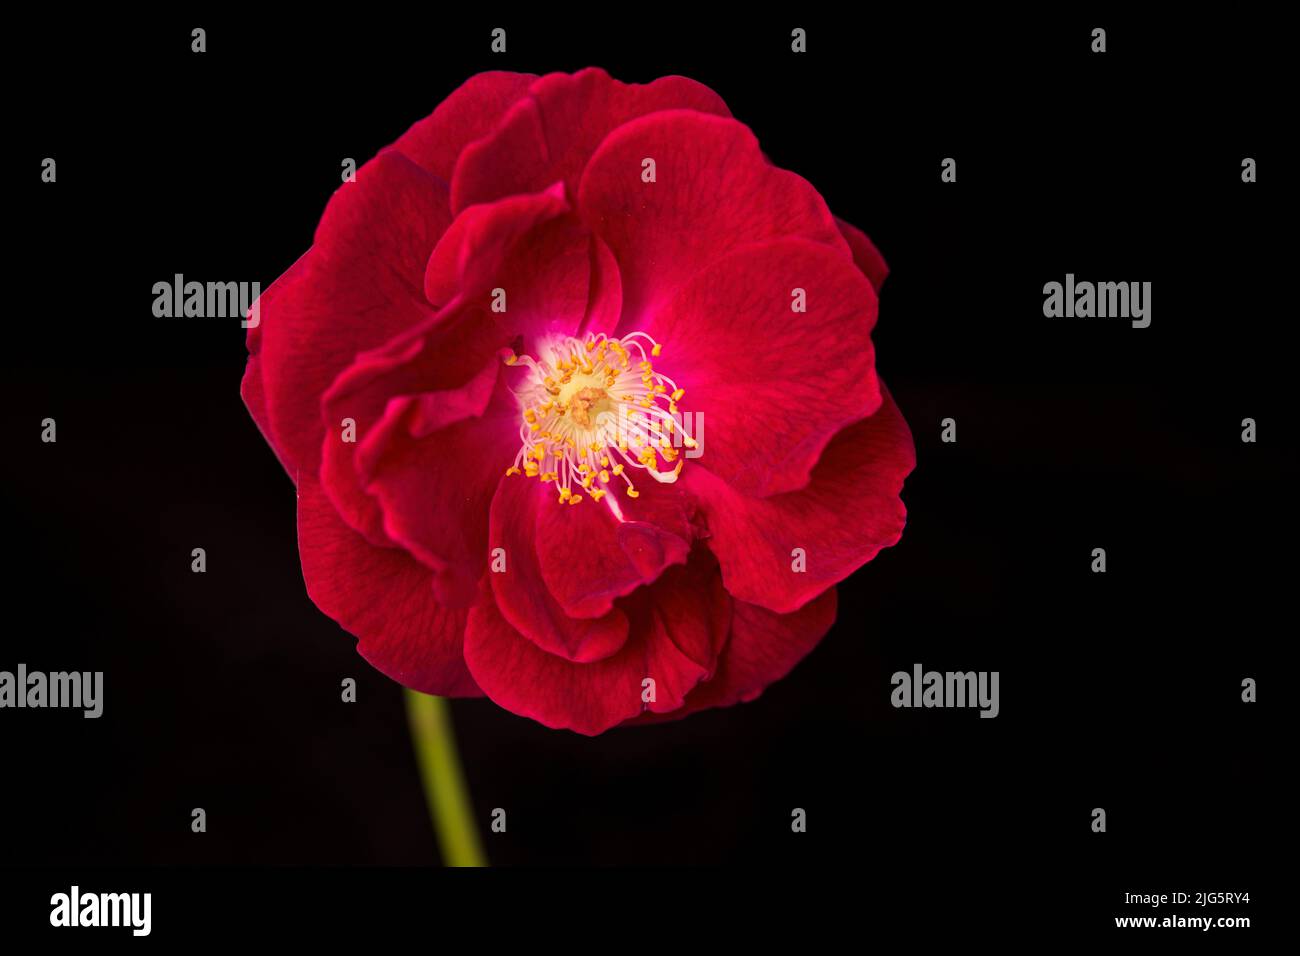 A studio photo of a red rose set against a black background. Stock Photo